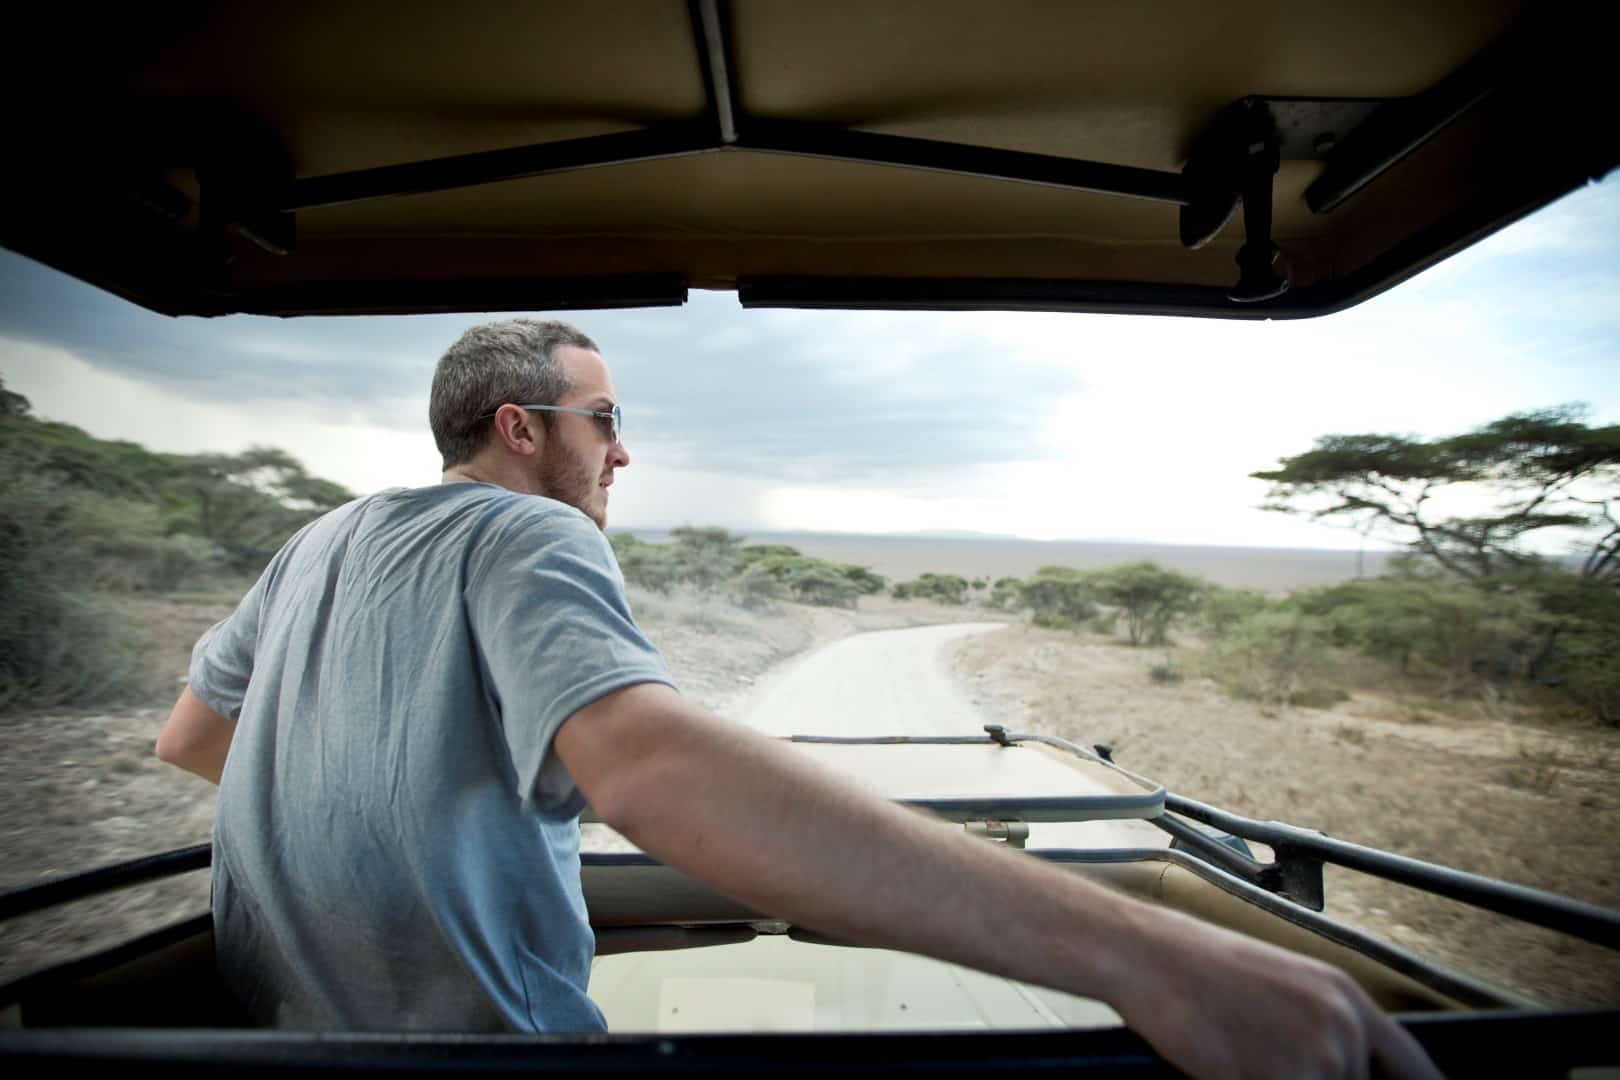 Best things to do in Arusha Tanzania - Scott Brills - Views from a Land Cruiser while on safari